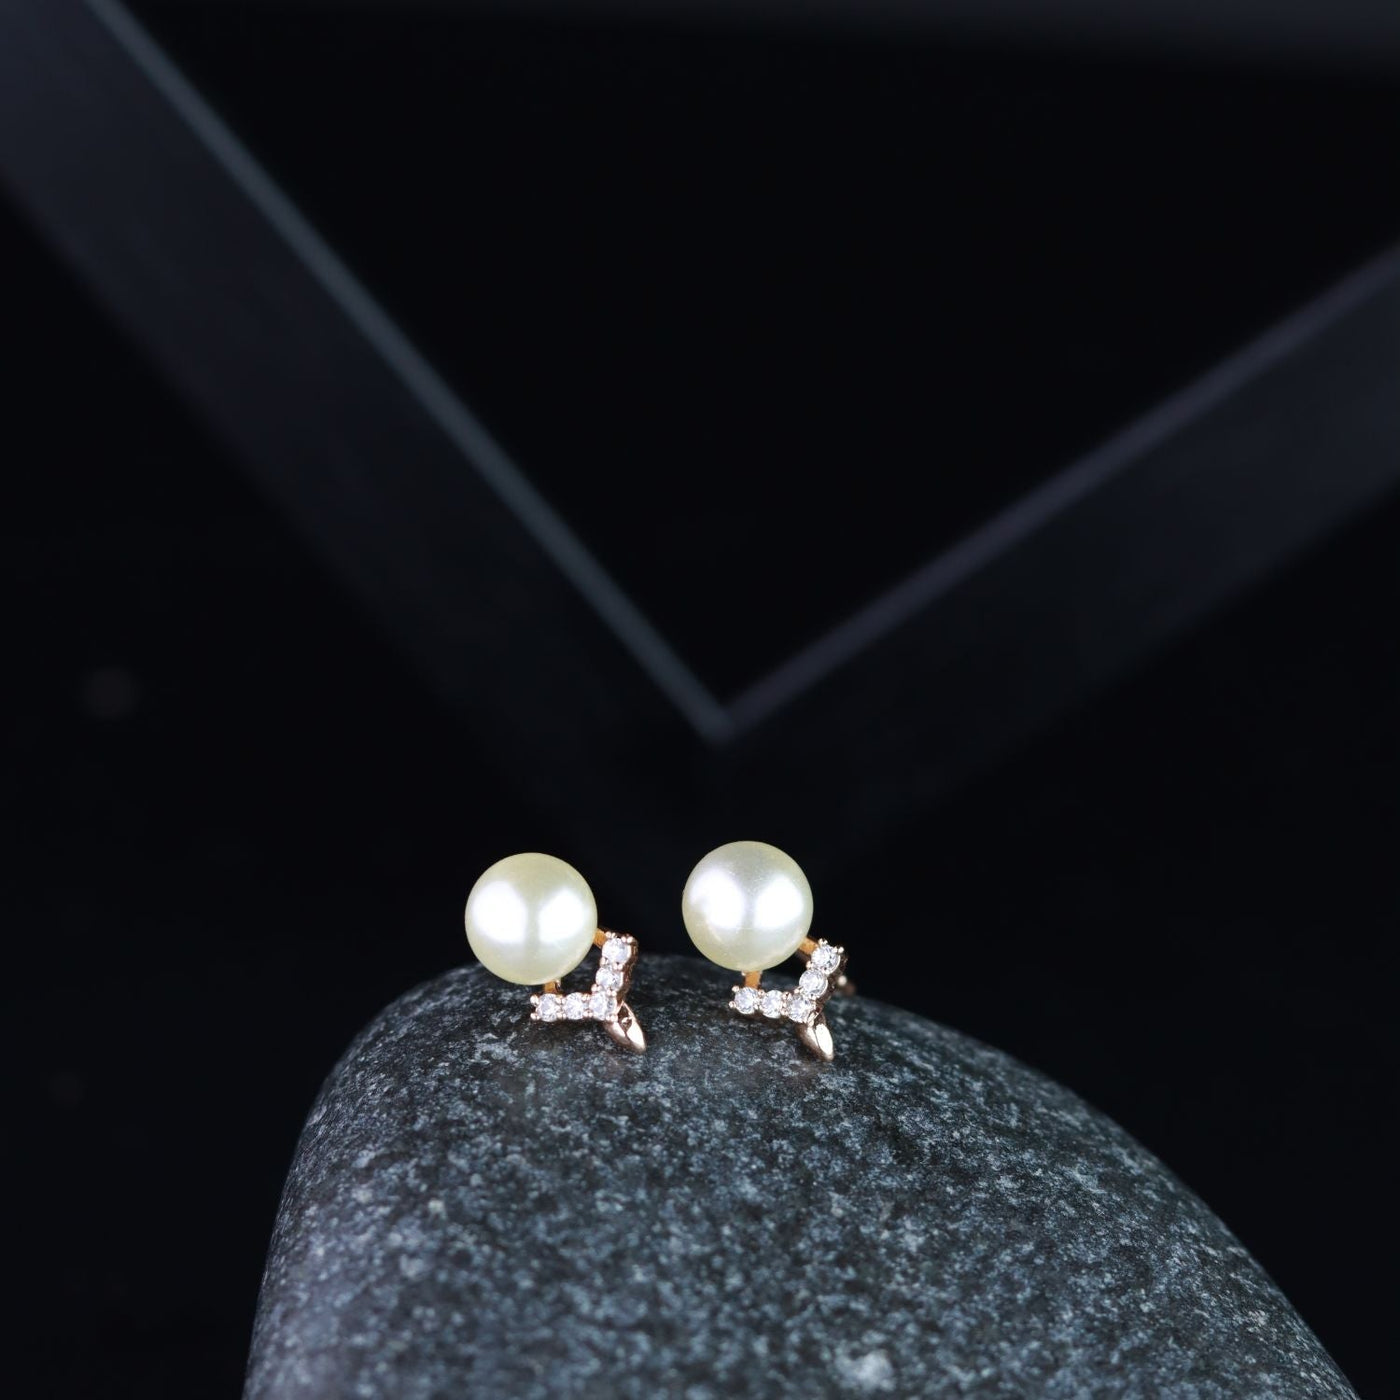 Women's I Jewels Valentine'S Special Rose Gold -Plated & White Contemporary Studs Earrings (E2973) - I Jewels